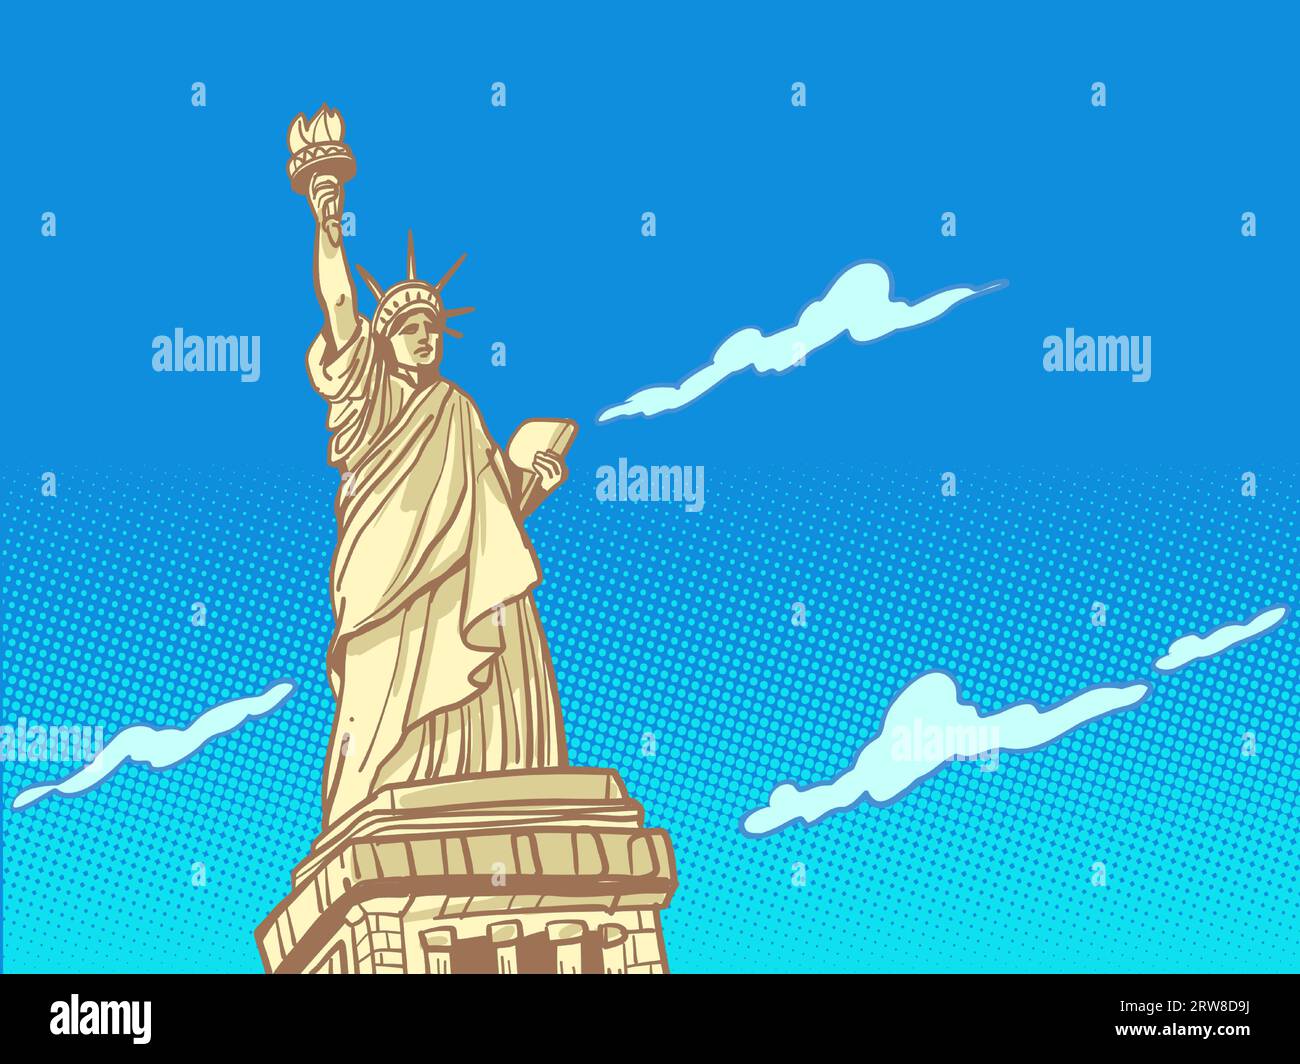 Travel to America and New York. Important landmarks around the world. Statue of Liberty against the sky. Stock Vector